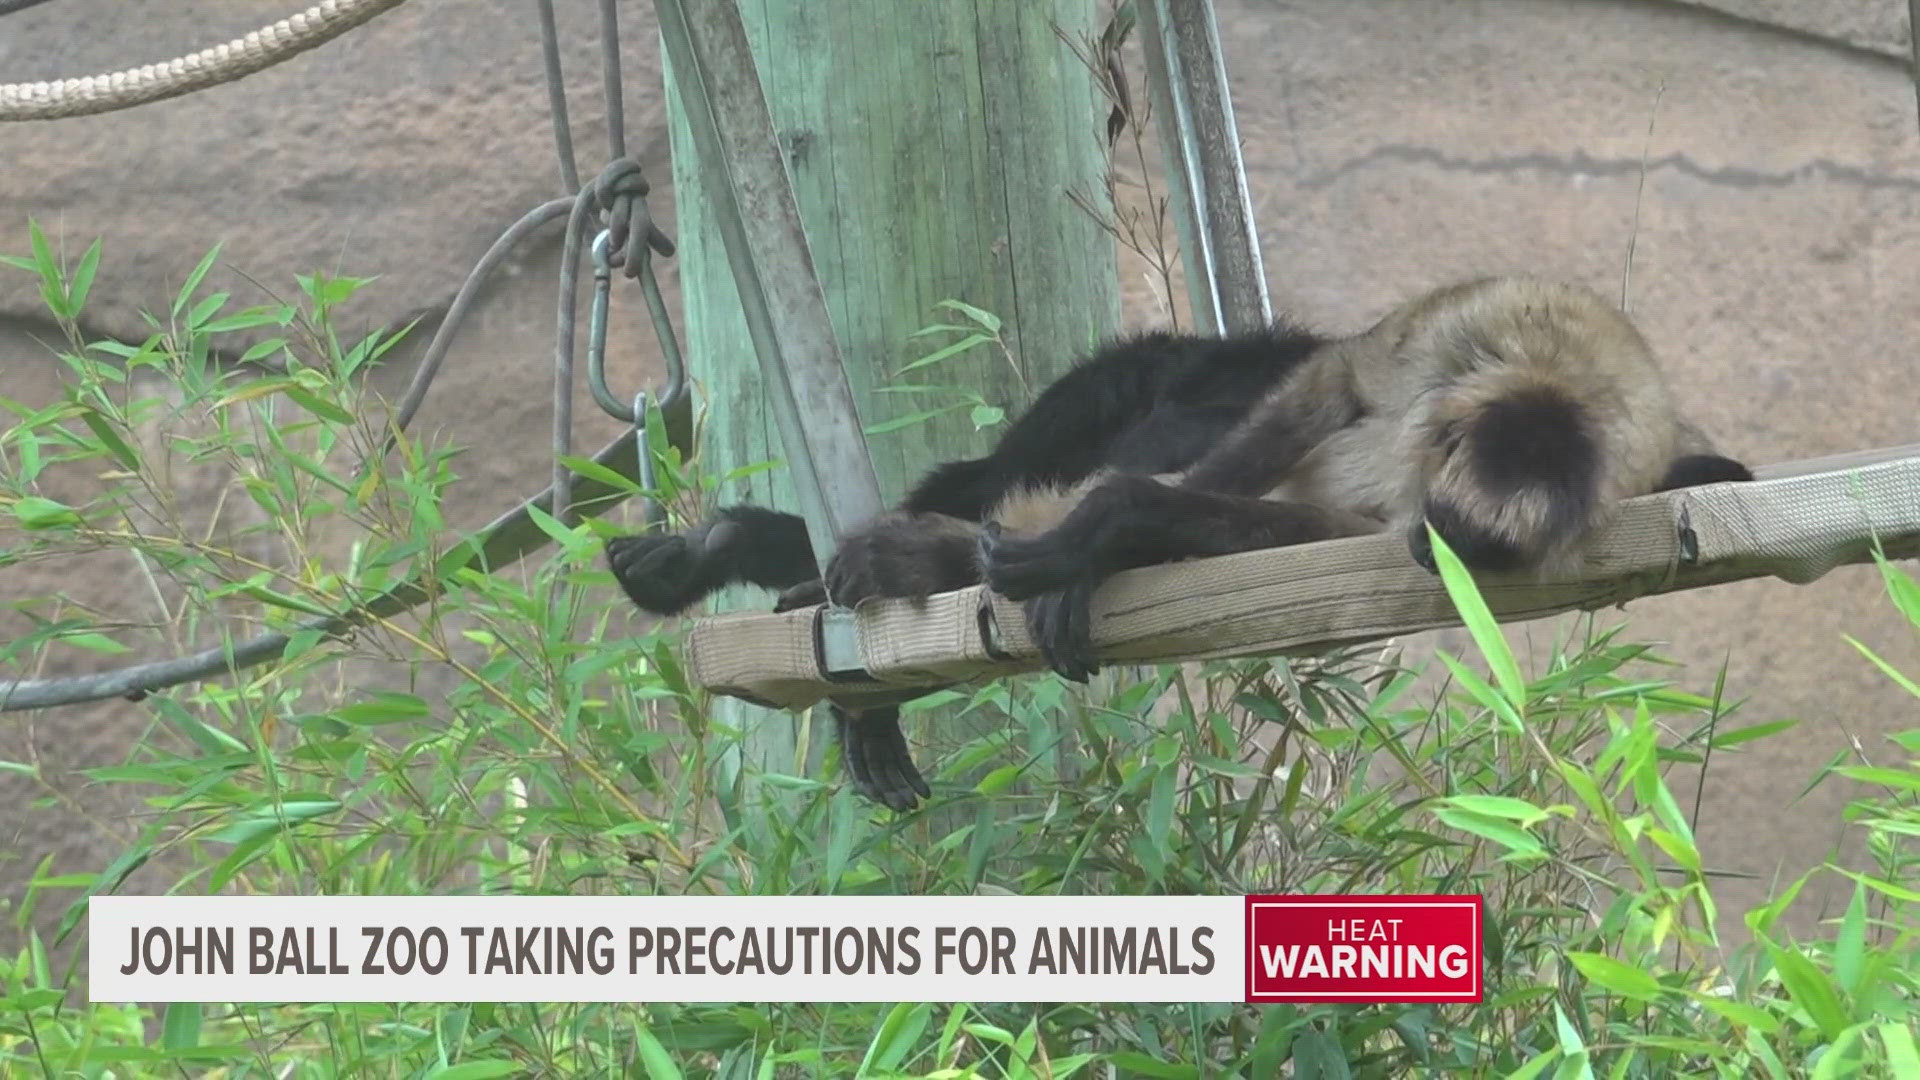 From misters to bloodsicles, the animals are staying cool in Michigan's heat wave.